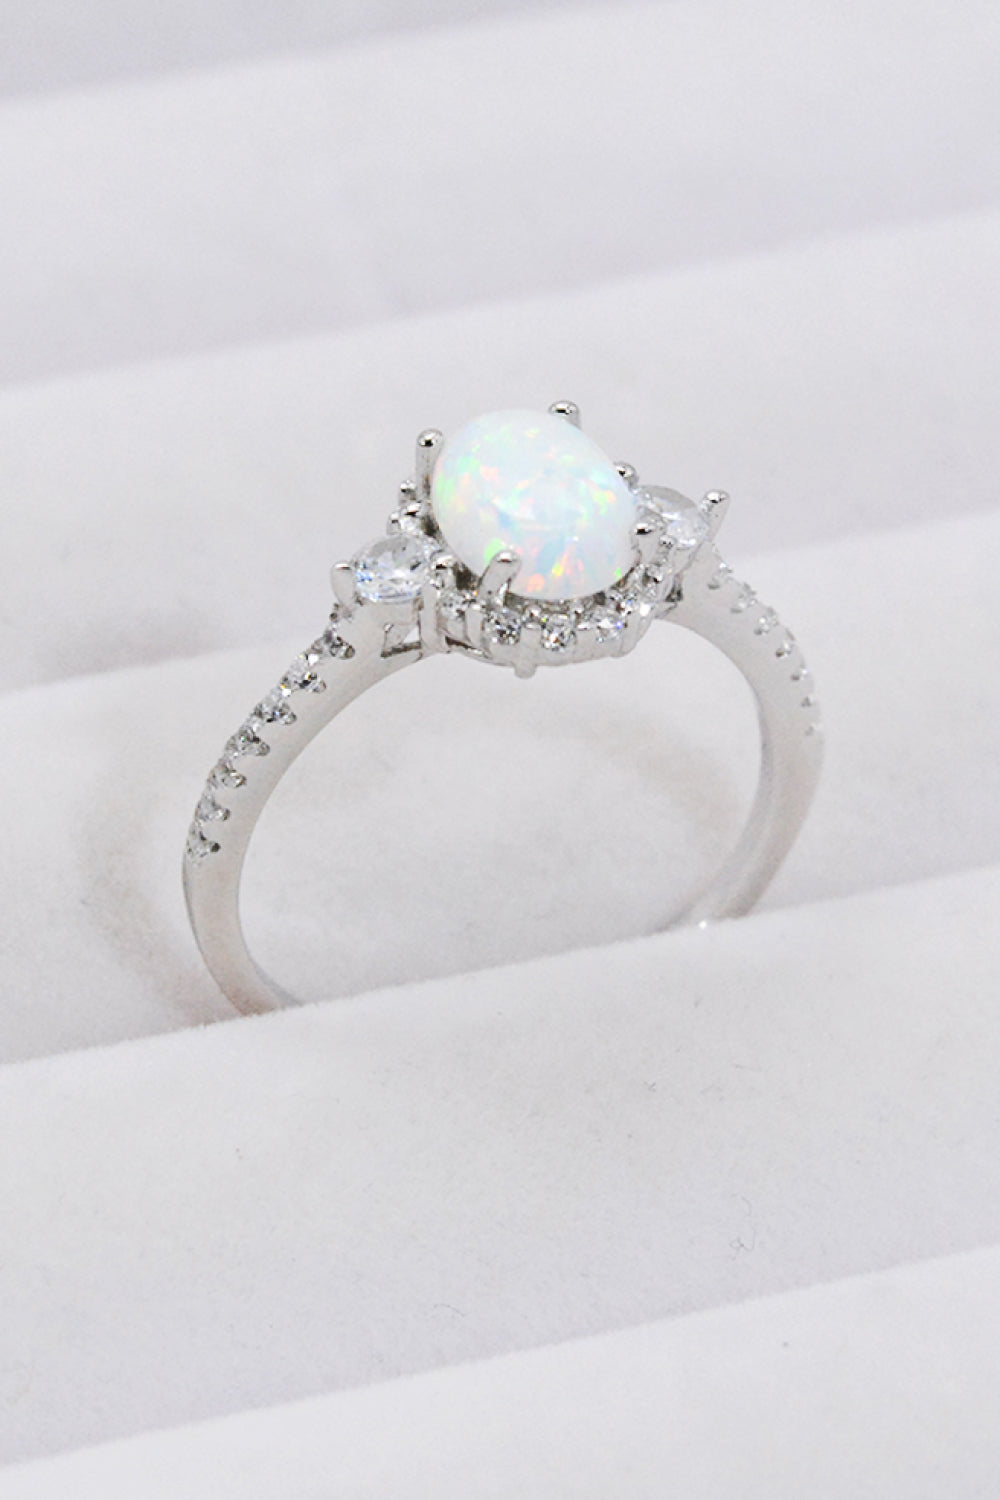 925 Sterling Silver Platinum-Plated Opal Ring - Tophatter Shopping Deals - Electronics, Jewelry, Auction, App, Bidding, Gadgets, Fashion